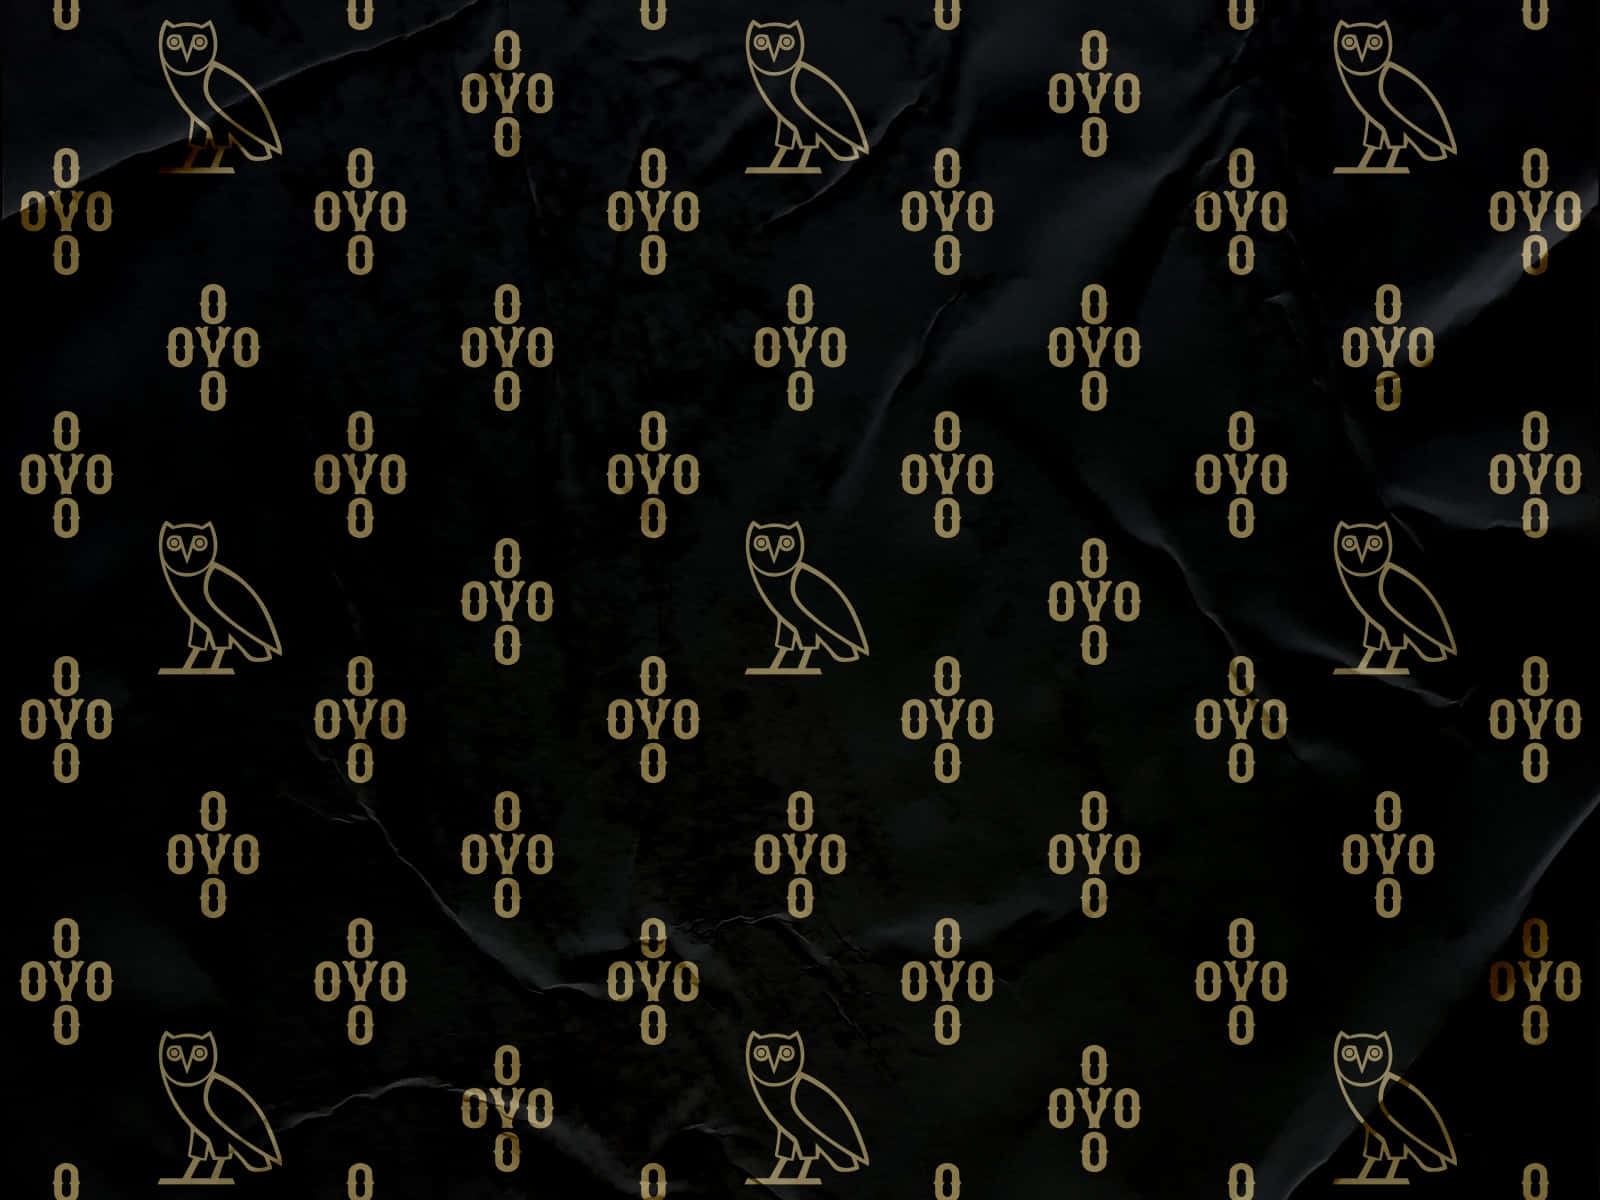 Welcome to OVOXO, the Ultimate Music Destination Wallpaper